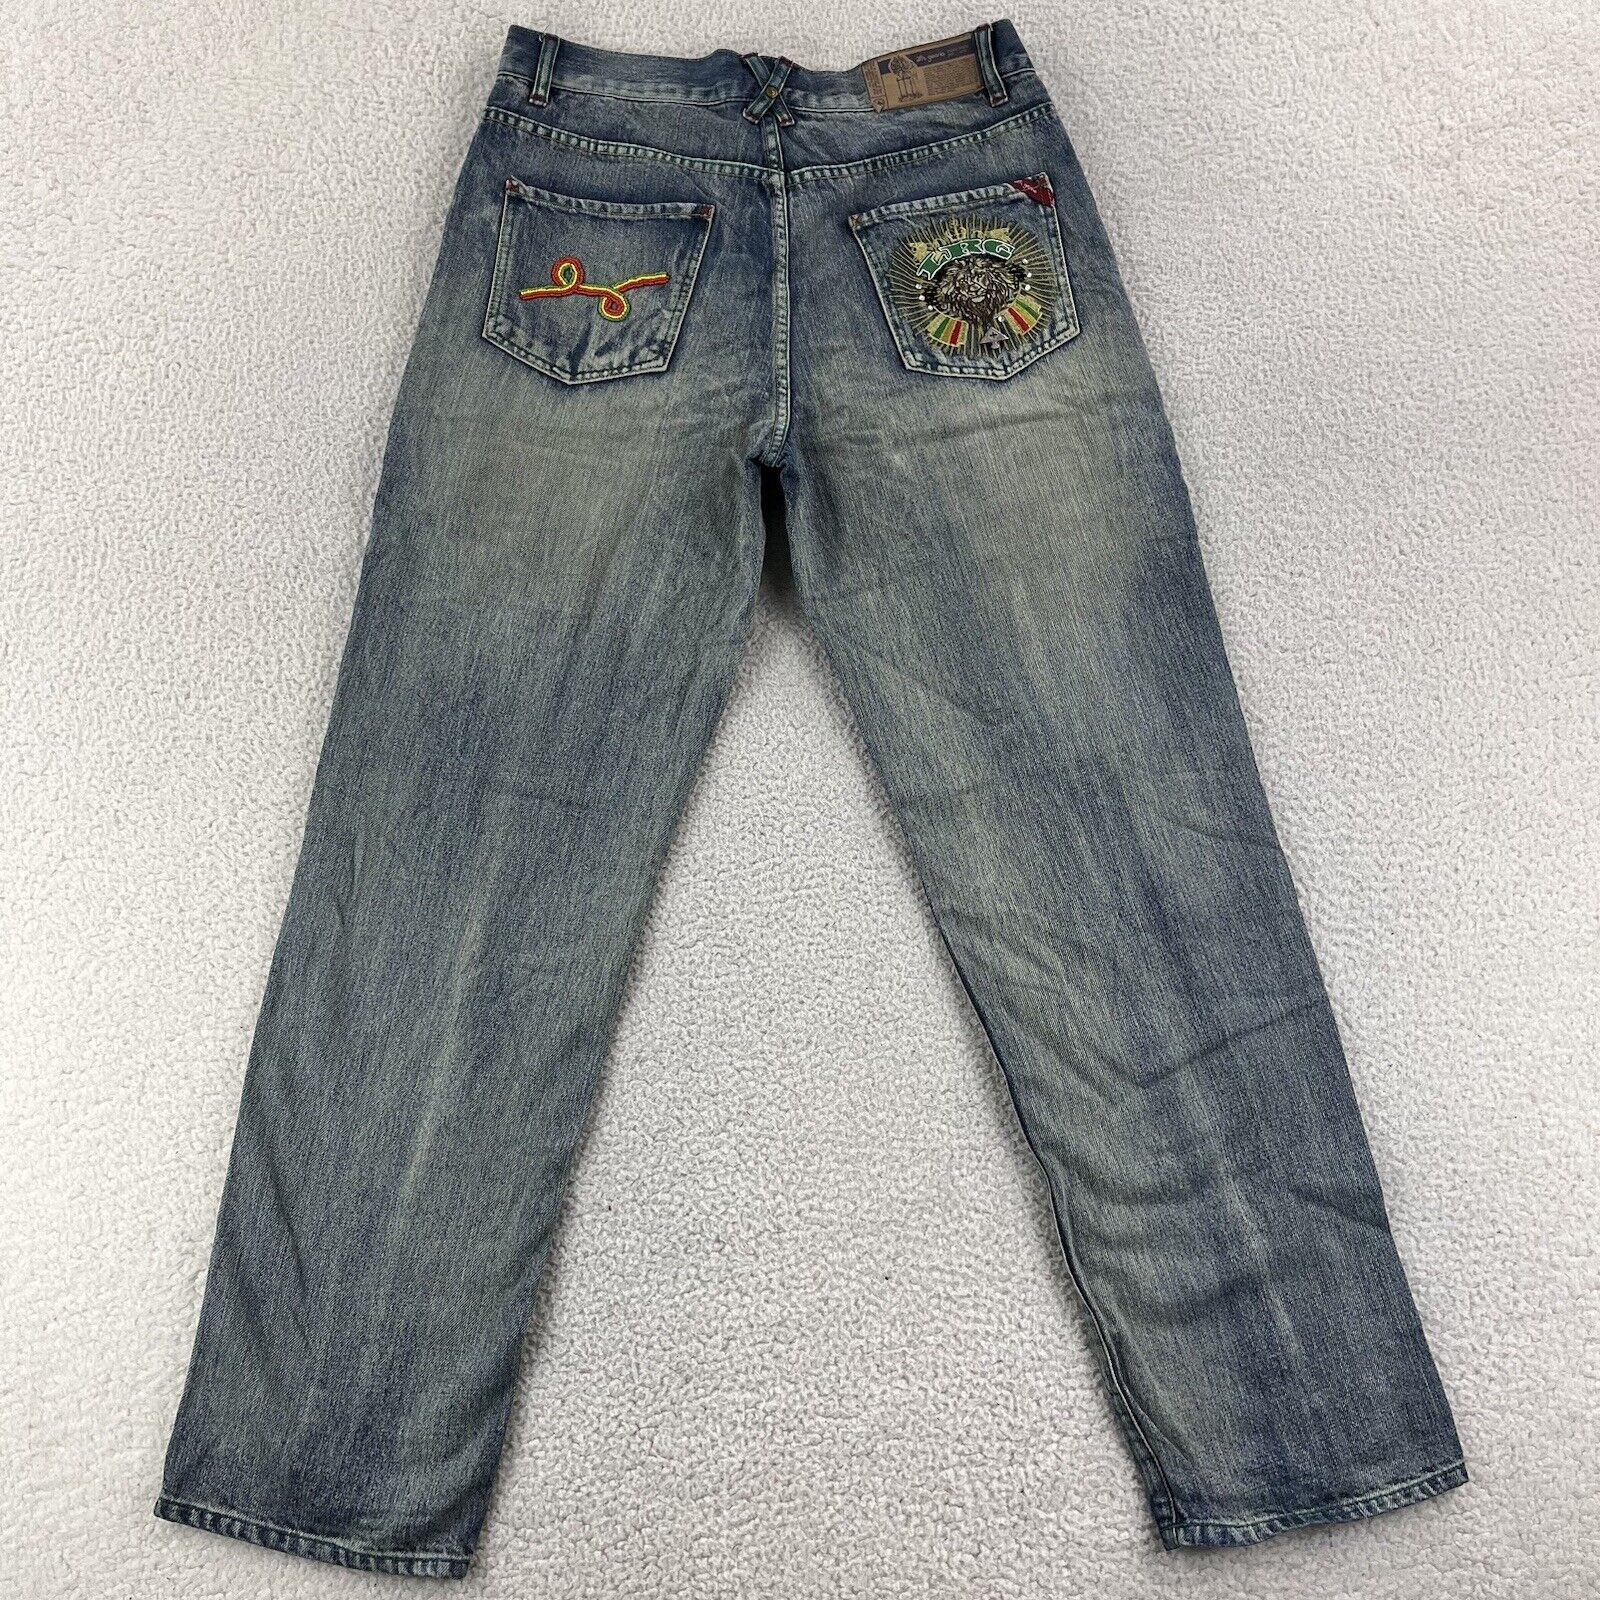 Vintage Lifted Research Group Jeans Mens 34 Blue Denim LRG Embroidered ...